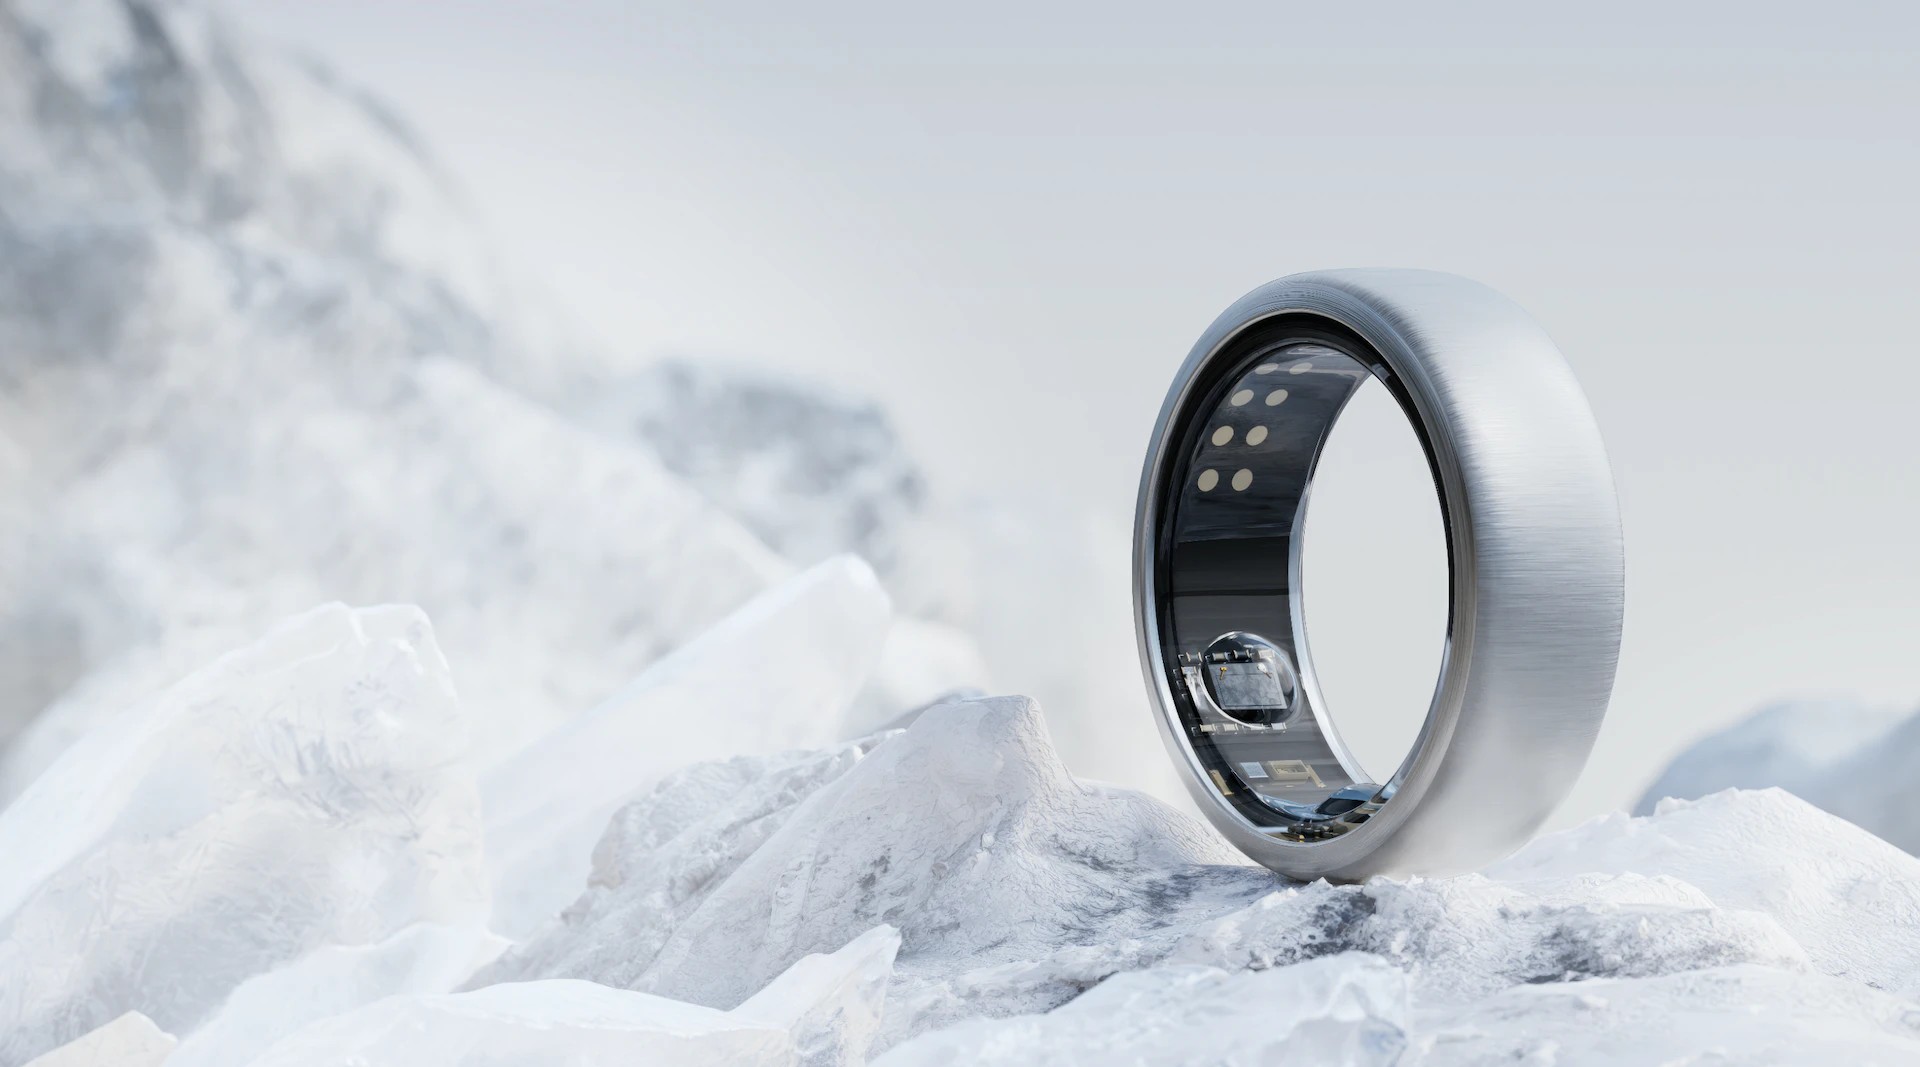 16Lab smart ring concept keeps all of your devices within reach - CNET